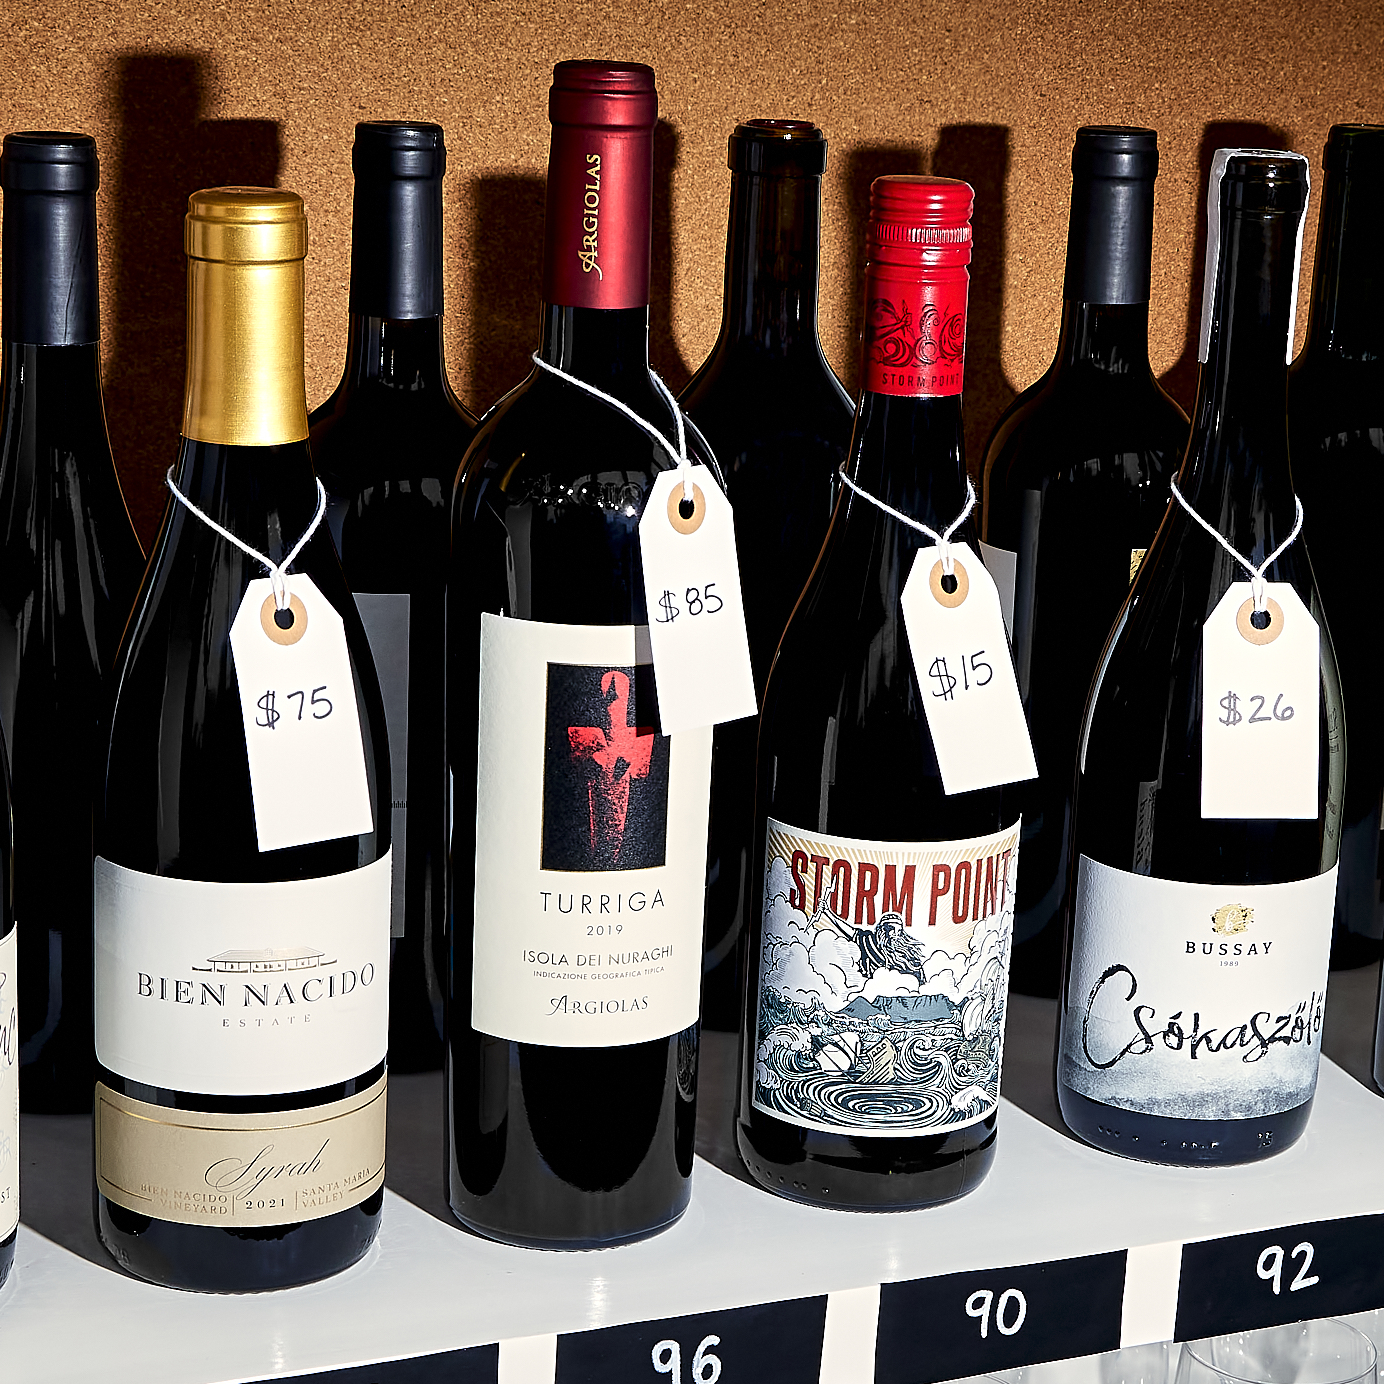 15 Most Expensive Wines & Spirits Ever Sold (2020)